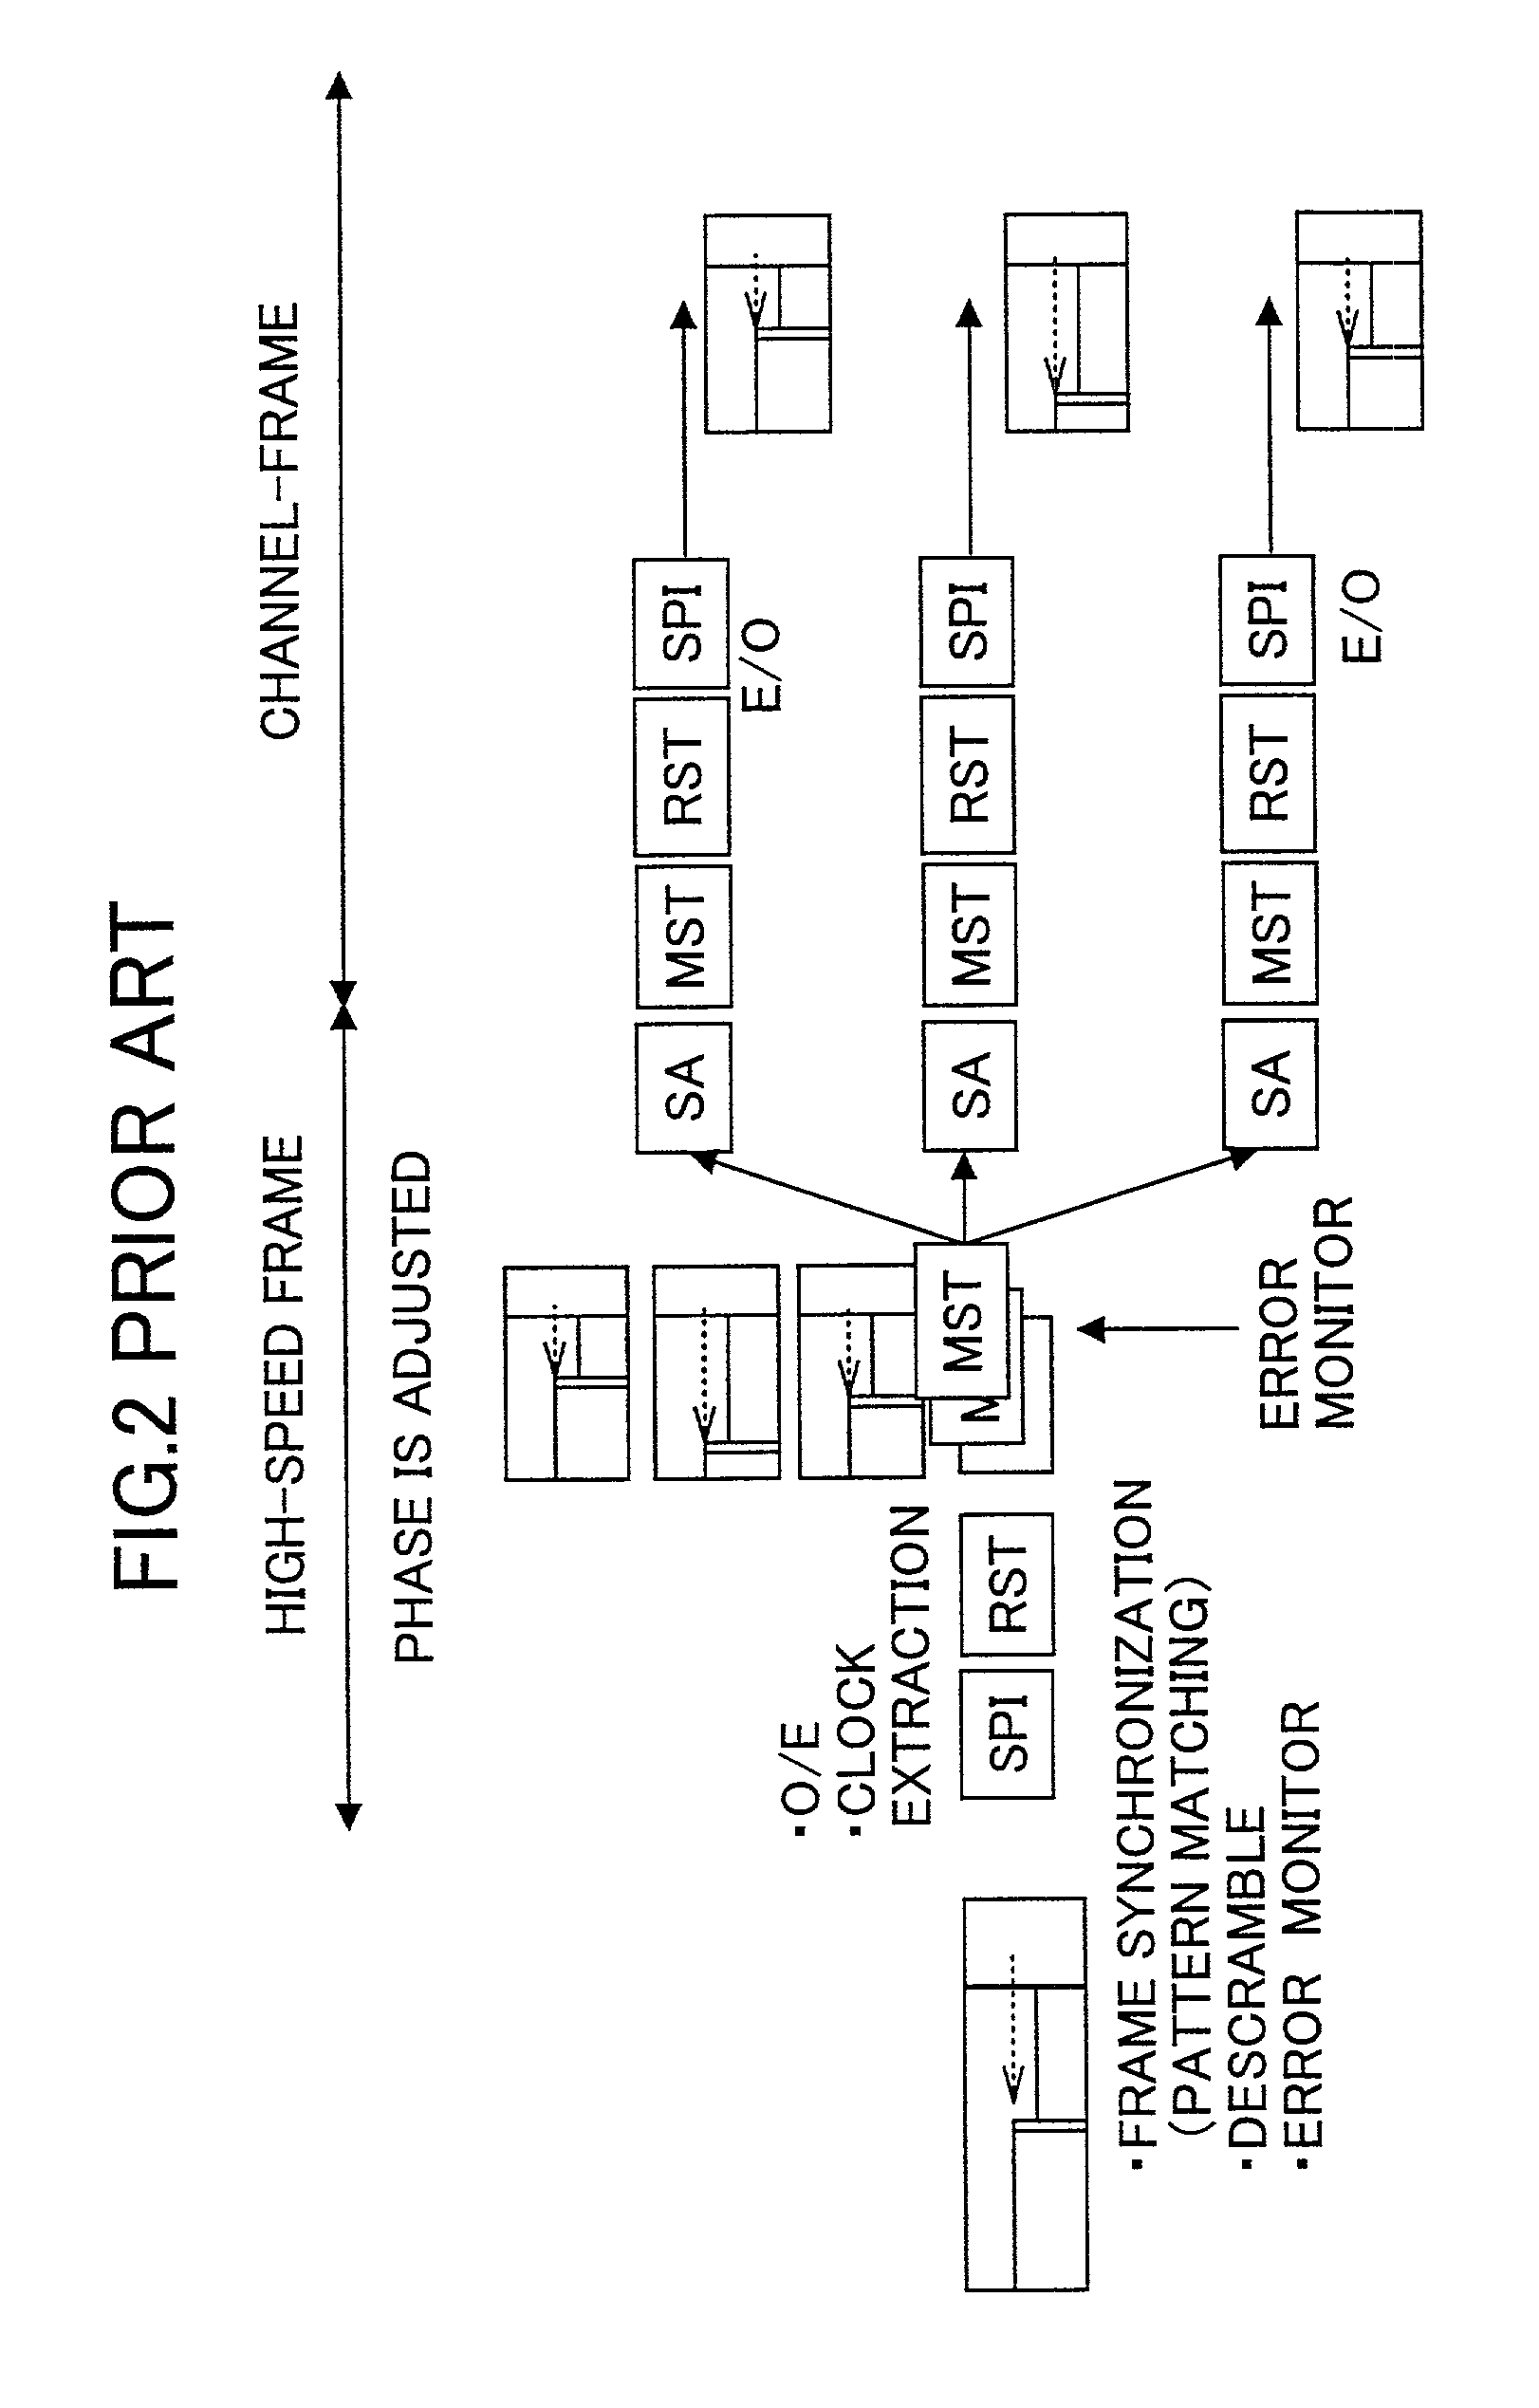 Multiplexing and transmission apparatus